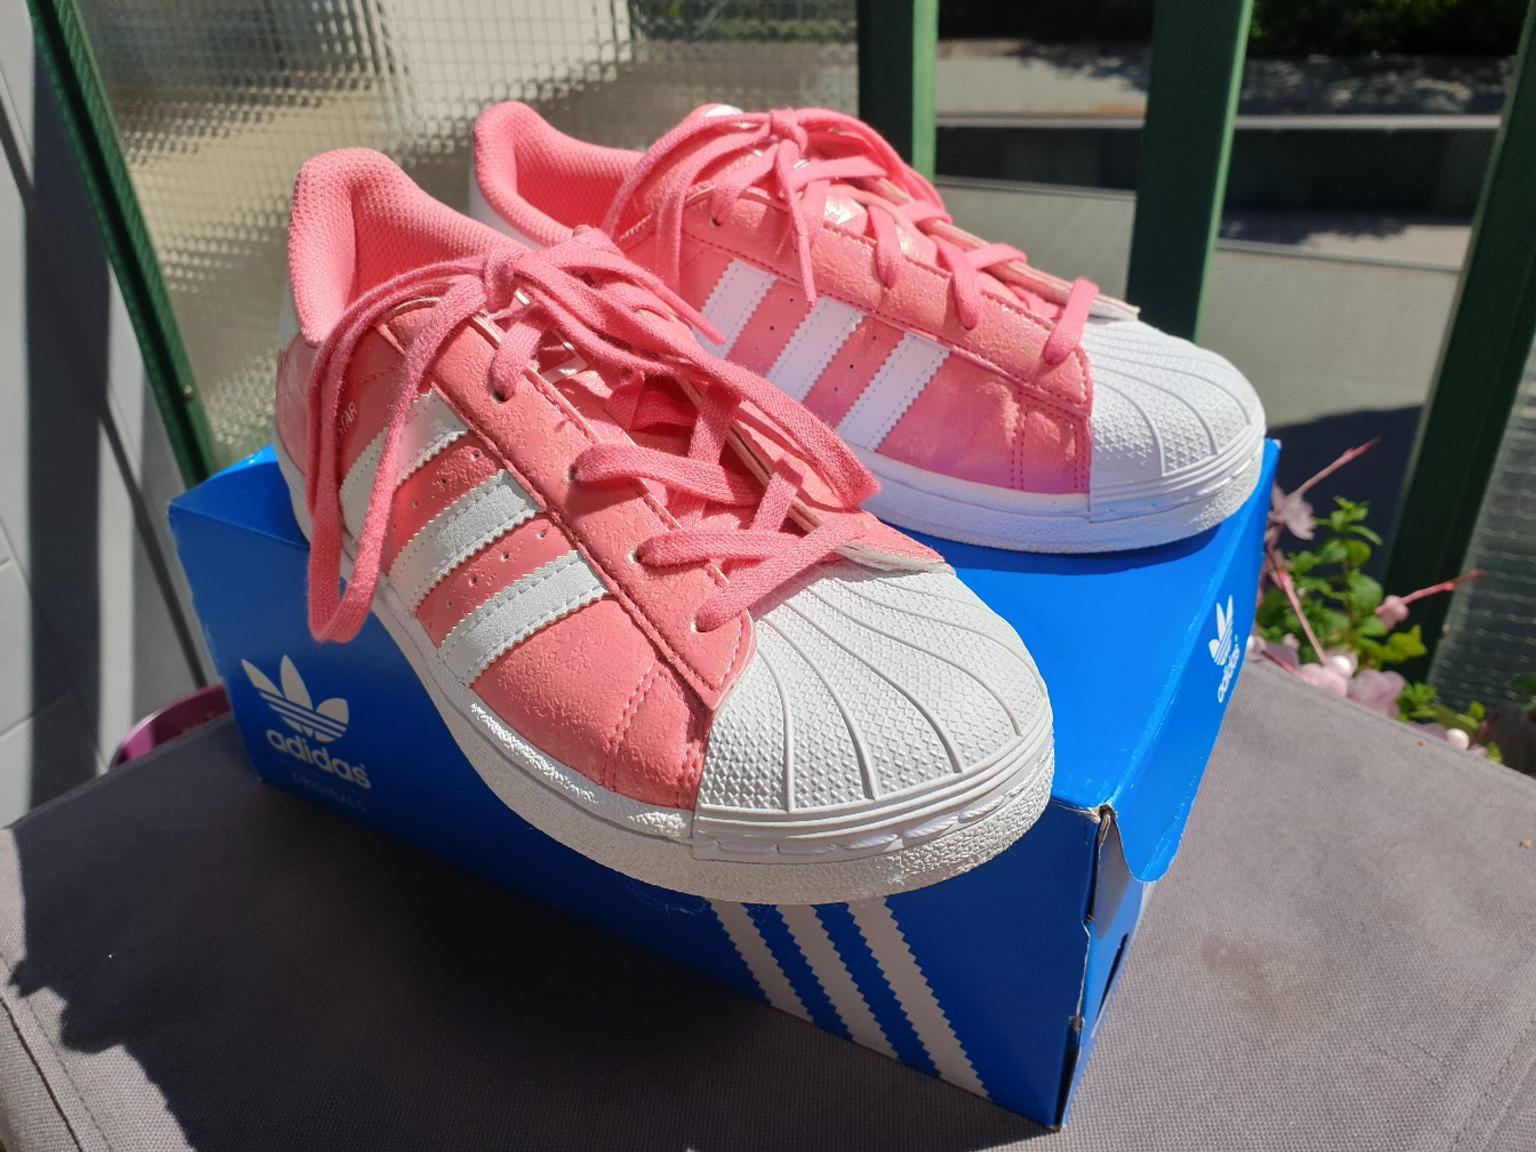 Adidas superstar nuove tg 35 rosa bianco in 20095 Cusano Milanino for  €33.00 for sale | Shpock